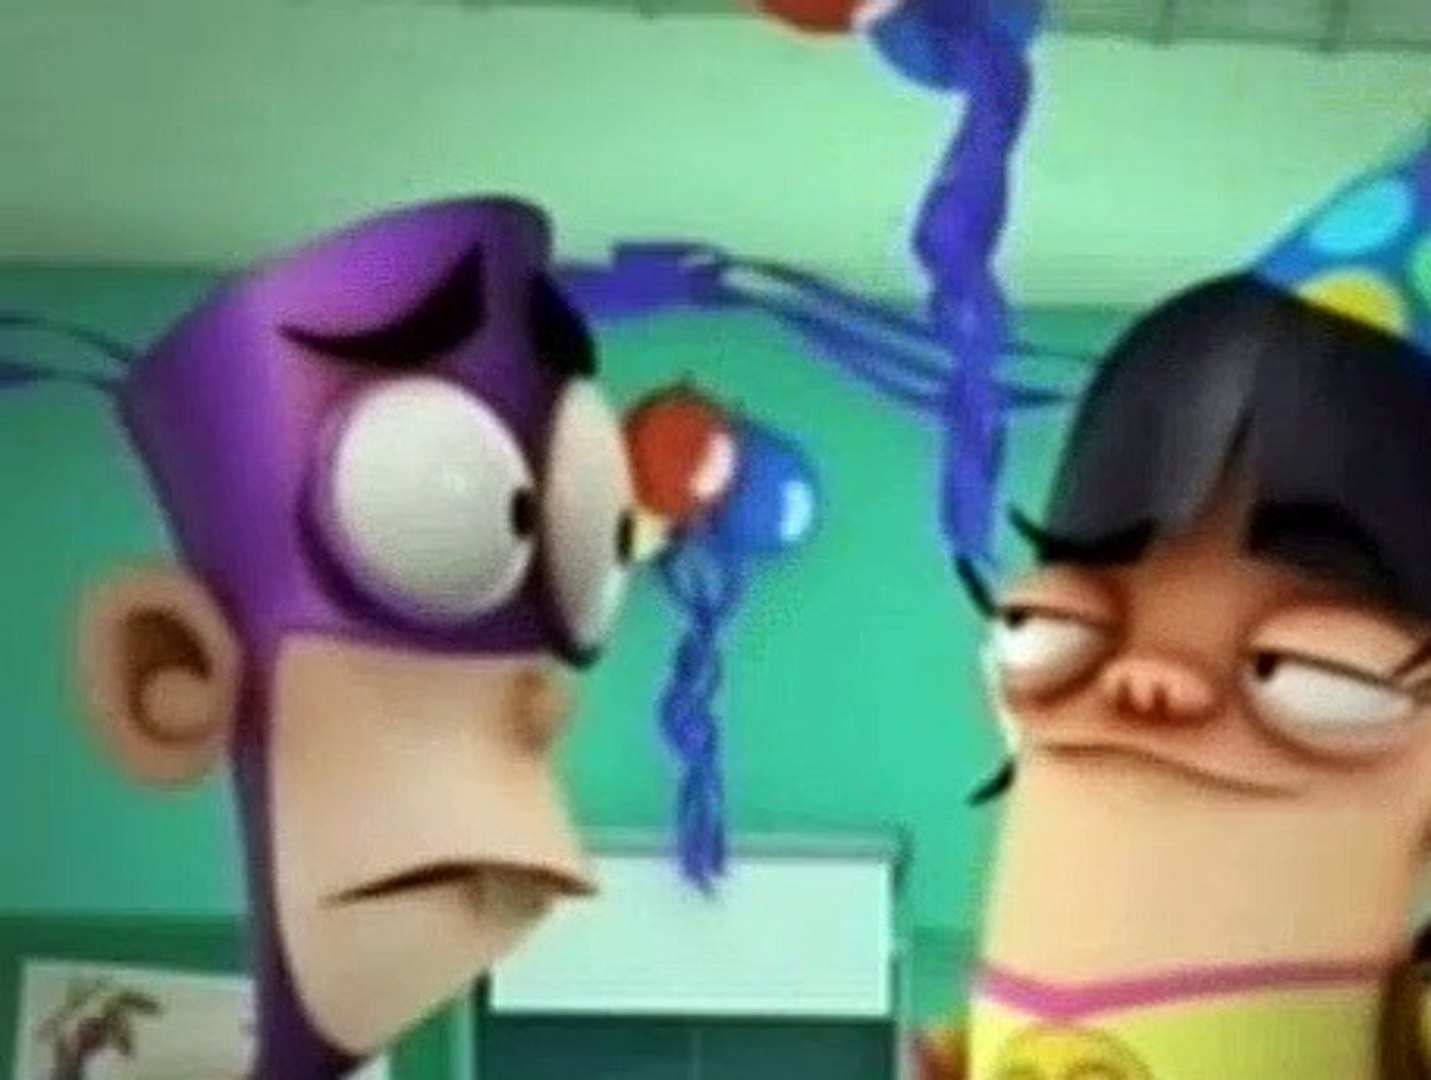 Fanboy And Chum Chum S02E07 Slime Day - Boog Zapper - video